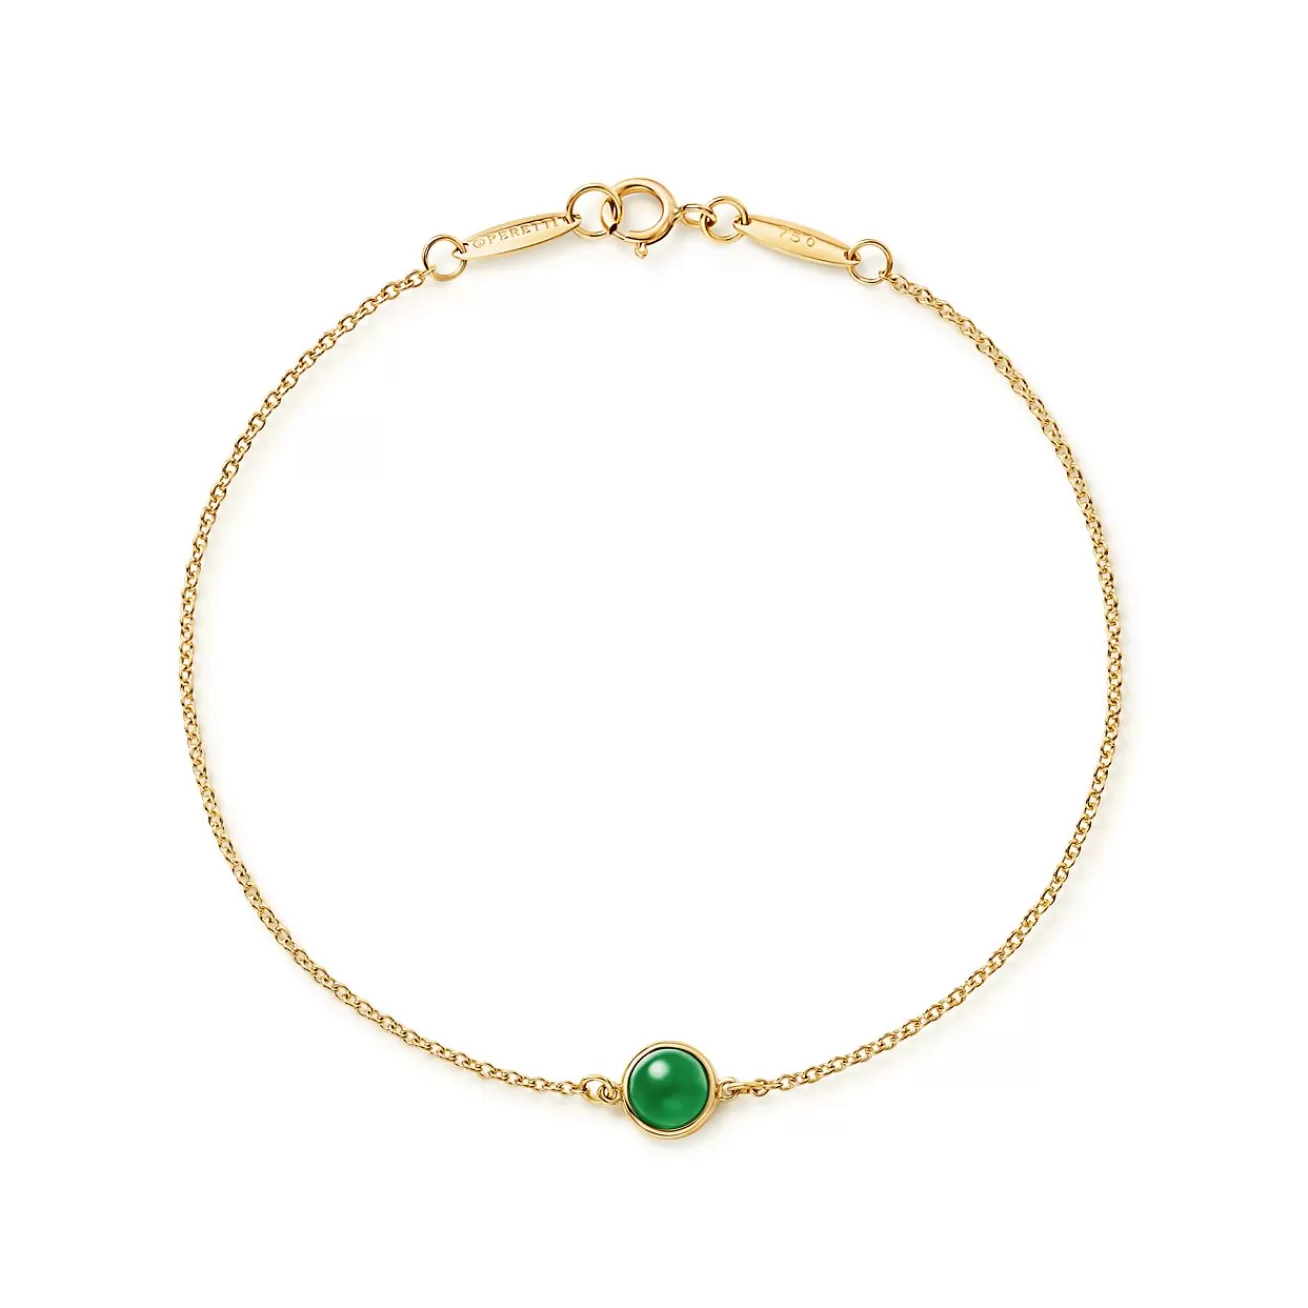 Tiffany & Co. Elsa Peretti® Color by the Yard Green Jade Bracelet in Yellow Gold | ^ Bracelets | Gold Jewelry